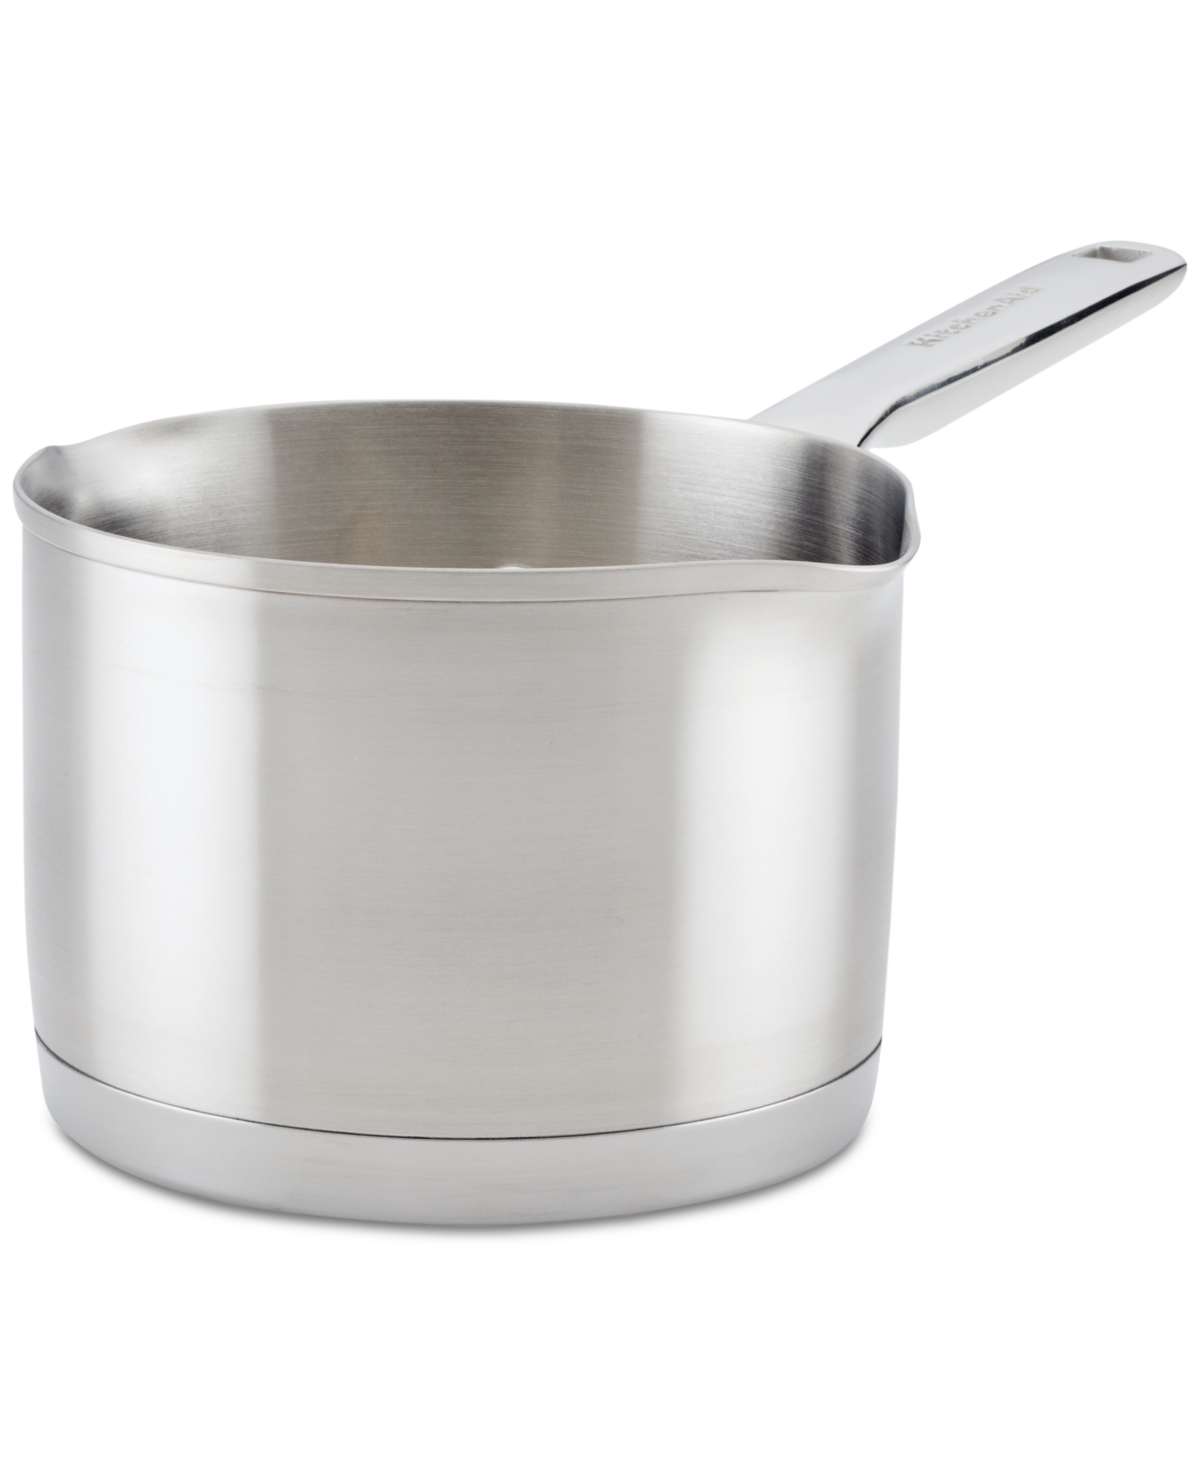 Kitchenaid 1.5-qt. Stainless Steel Saucepan In Silver